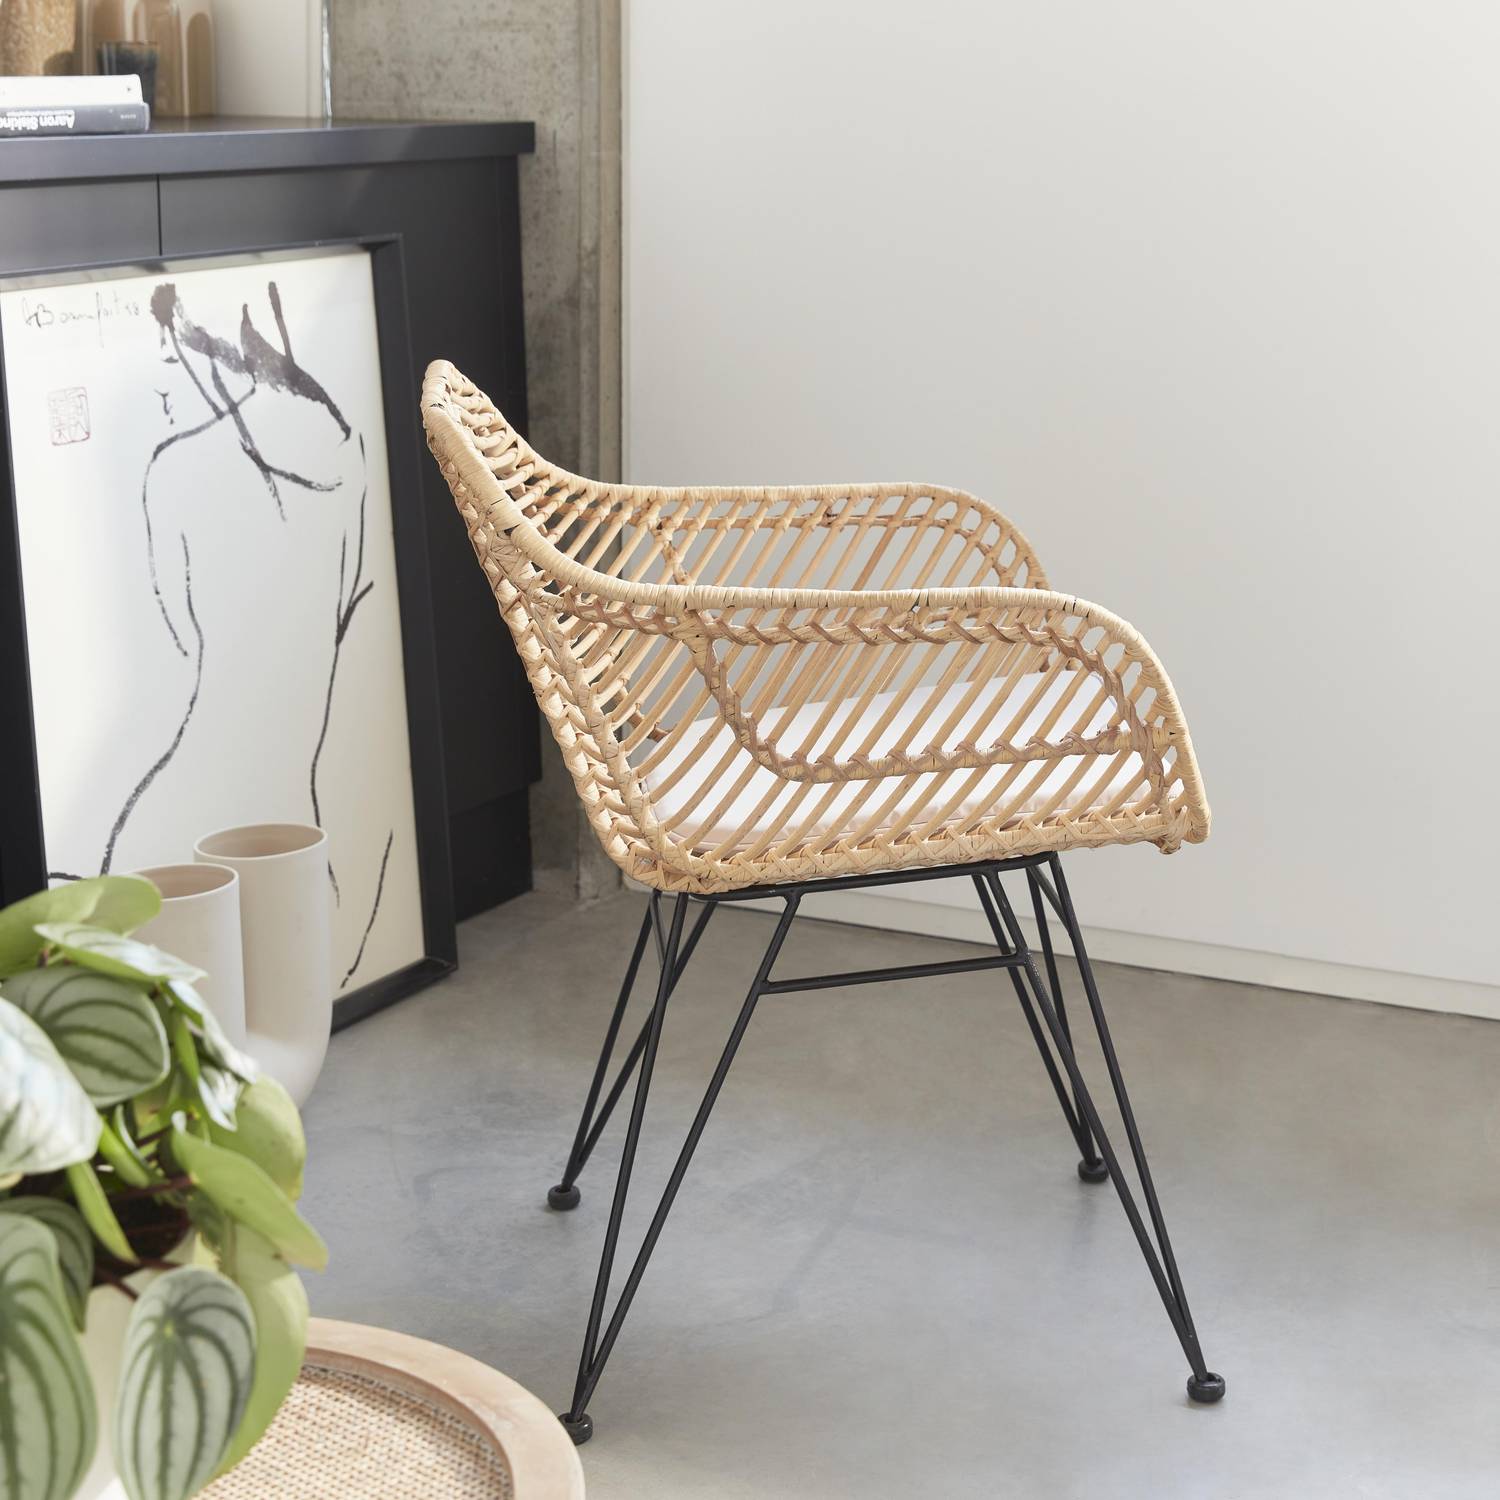 Rattan dining armchair with metal legs and cushion - Cahya - Natural rattan, White cushion Photo2